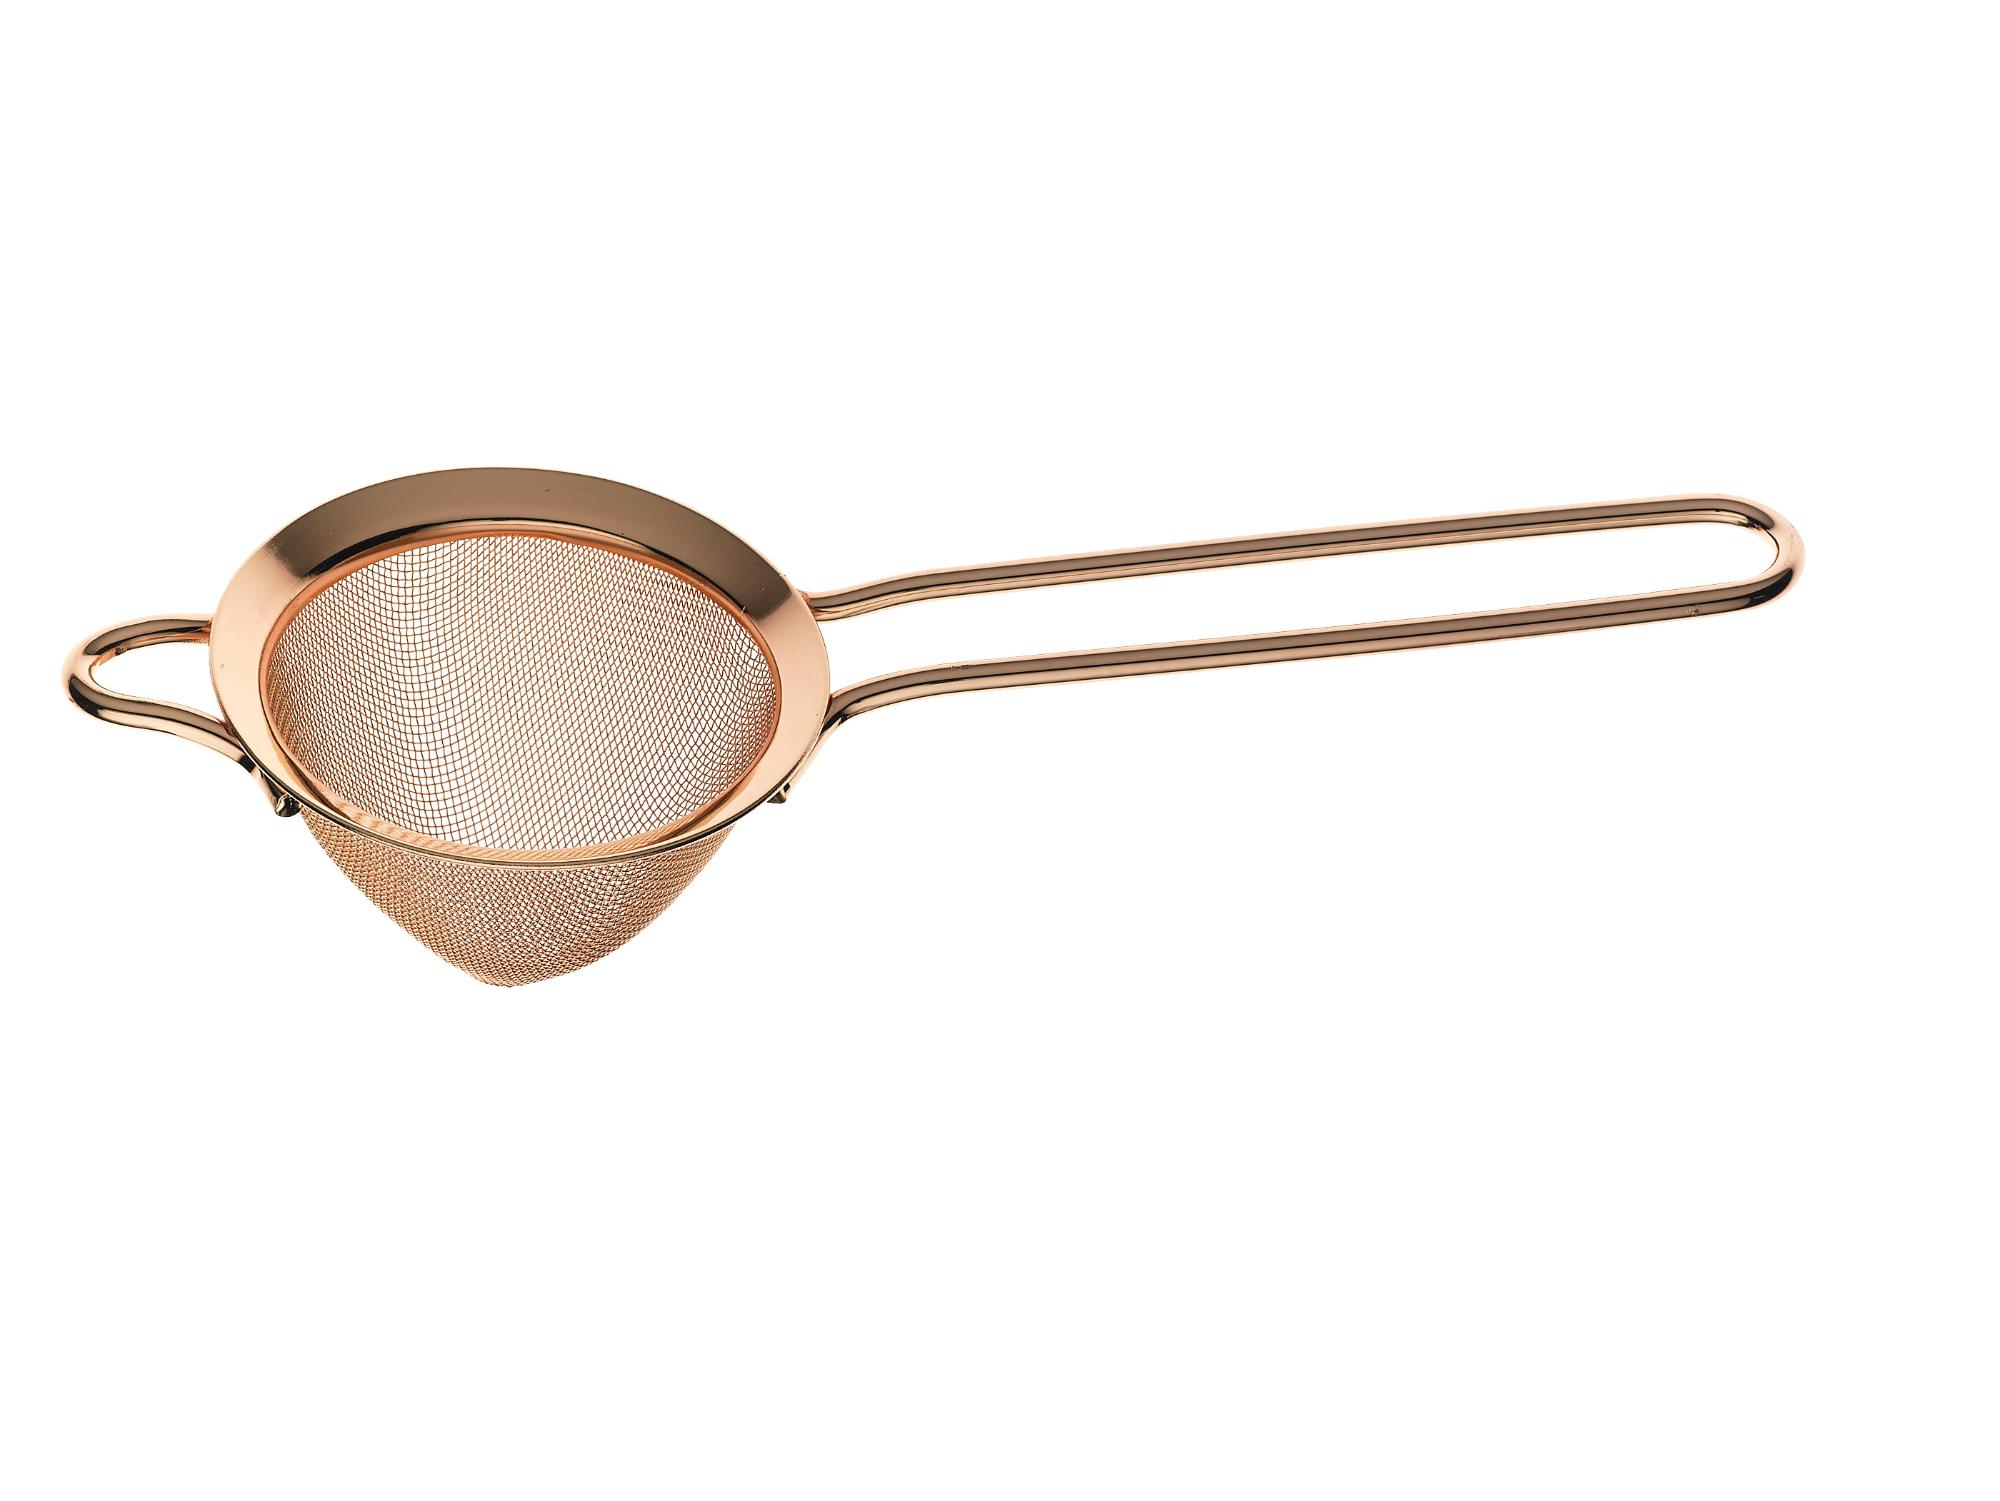 Fine Mesh Strainer, bowl, Copper plated, 89x264mm